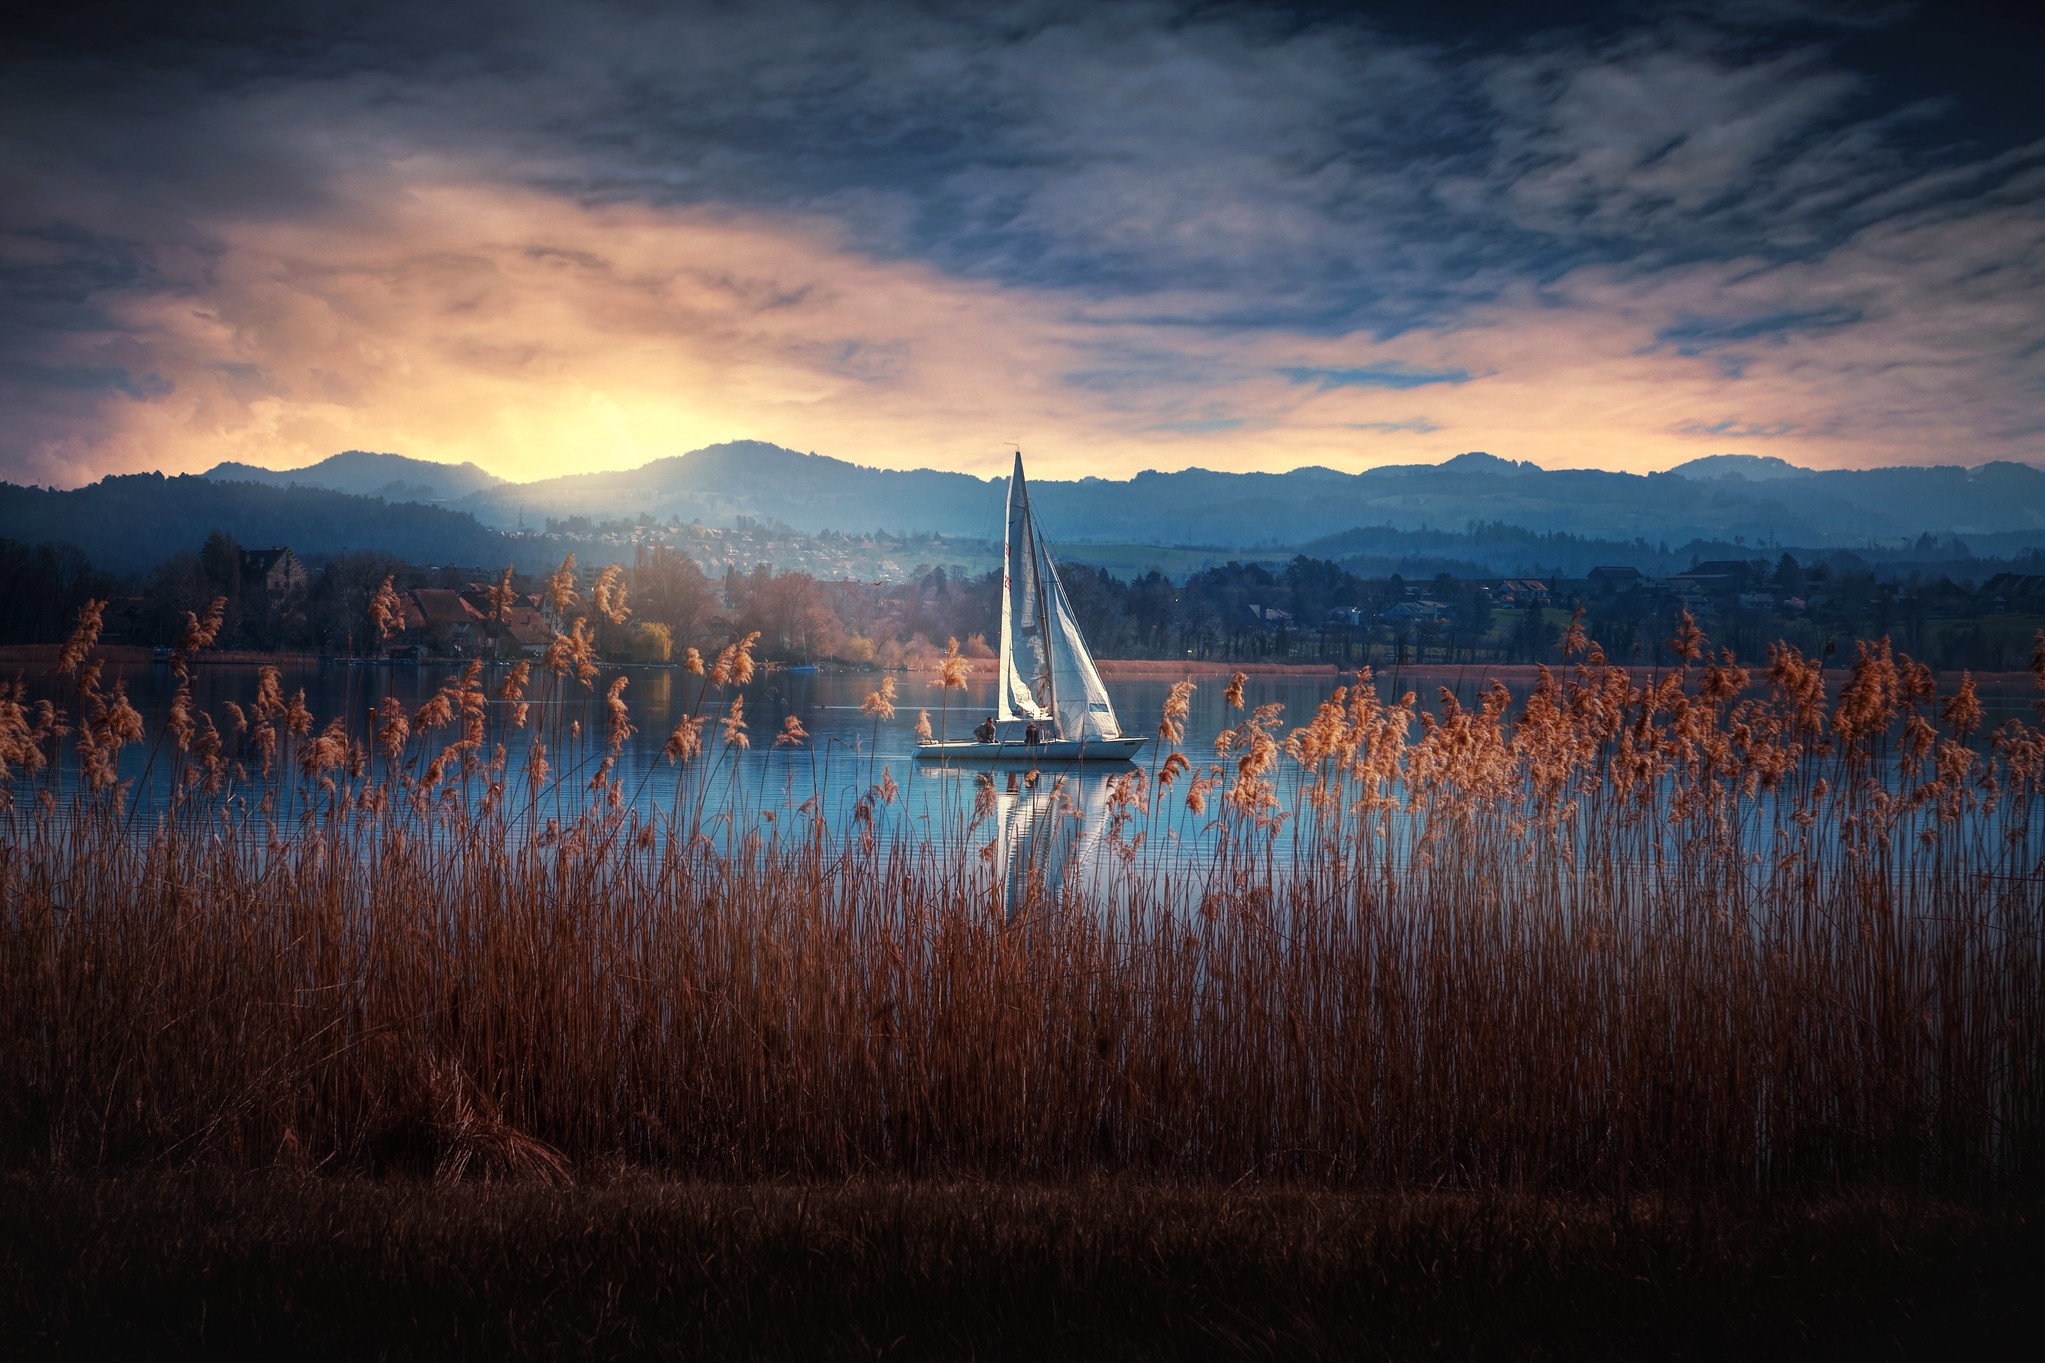 A lone sailboat on the lake during sunset